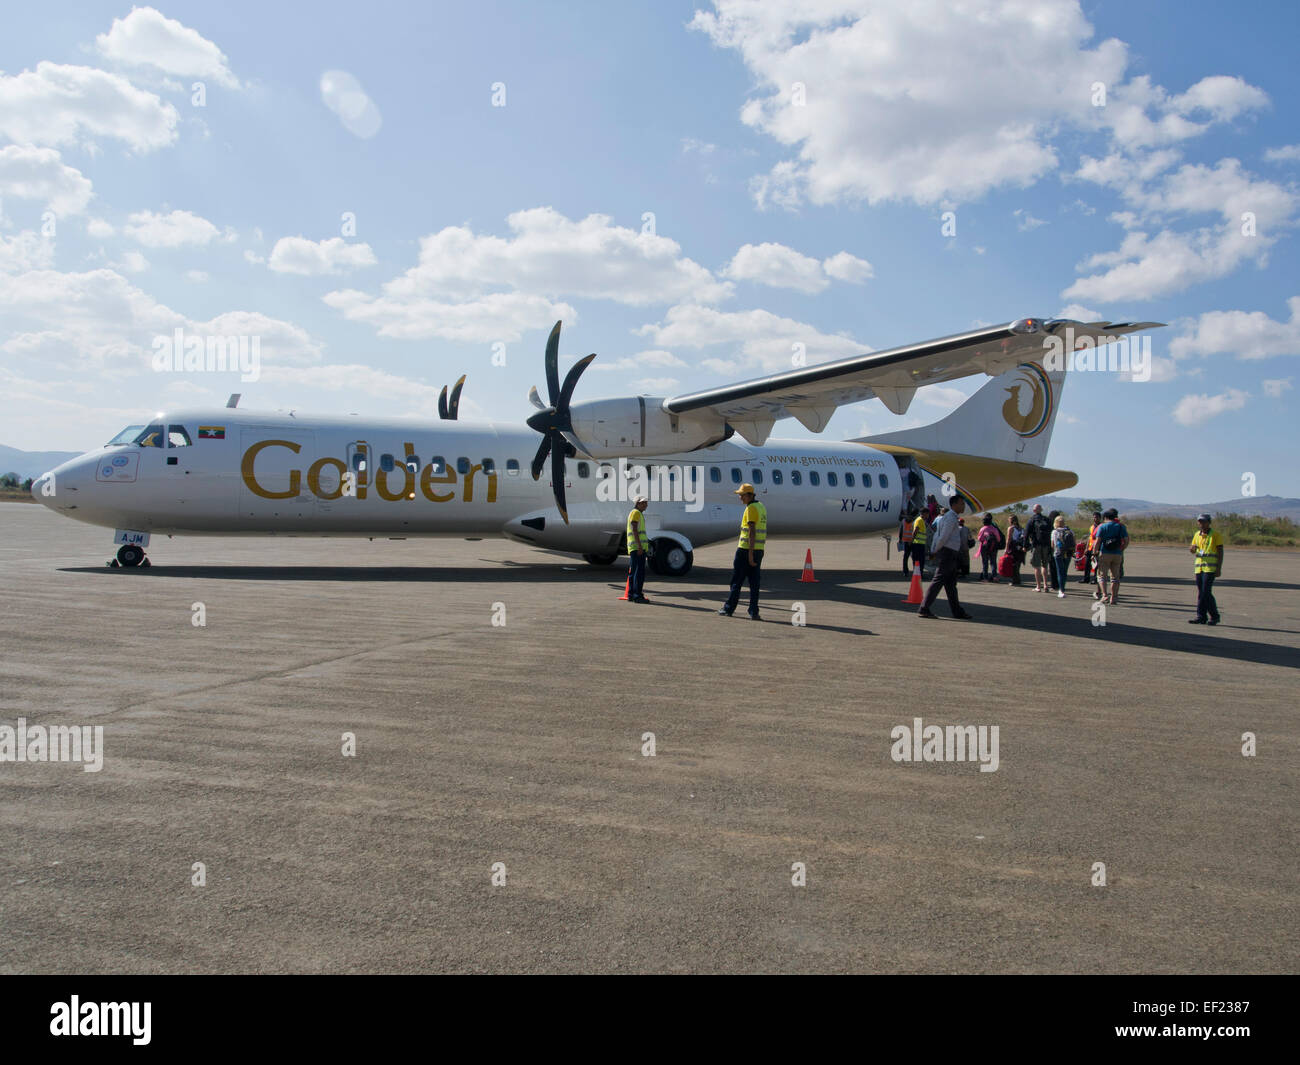 Golden Myanmar airlines airplane at Heho airport in Shan state, Myanmar Stock Photo